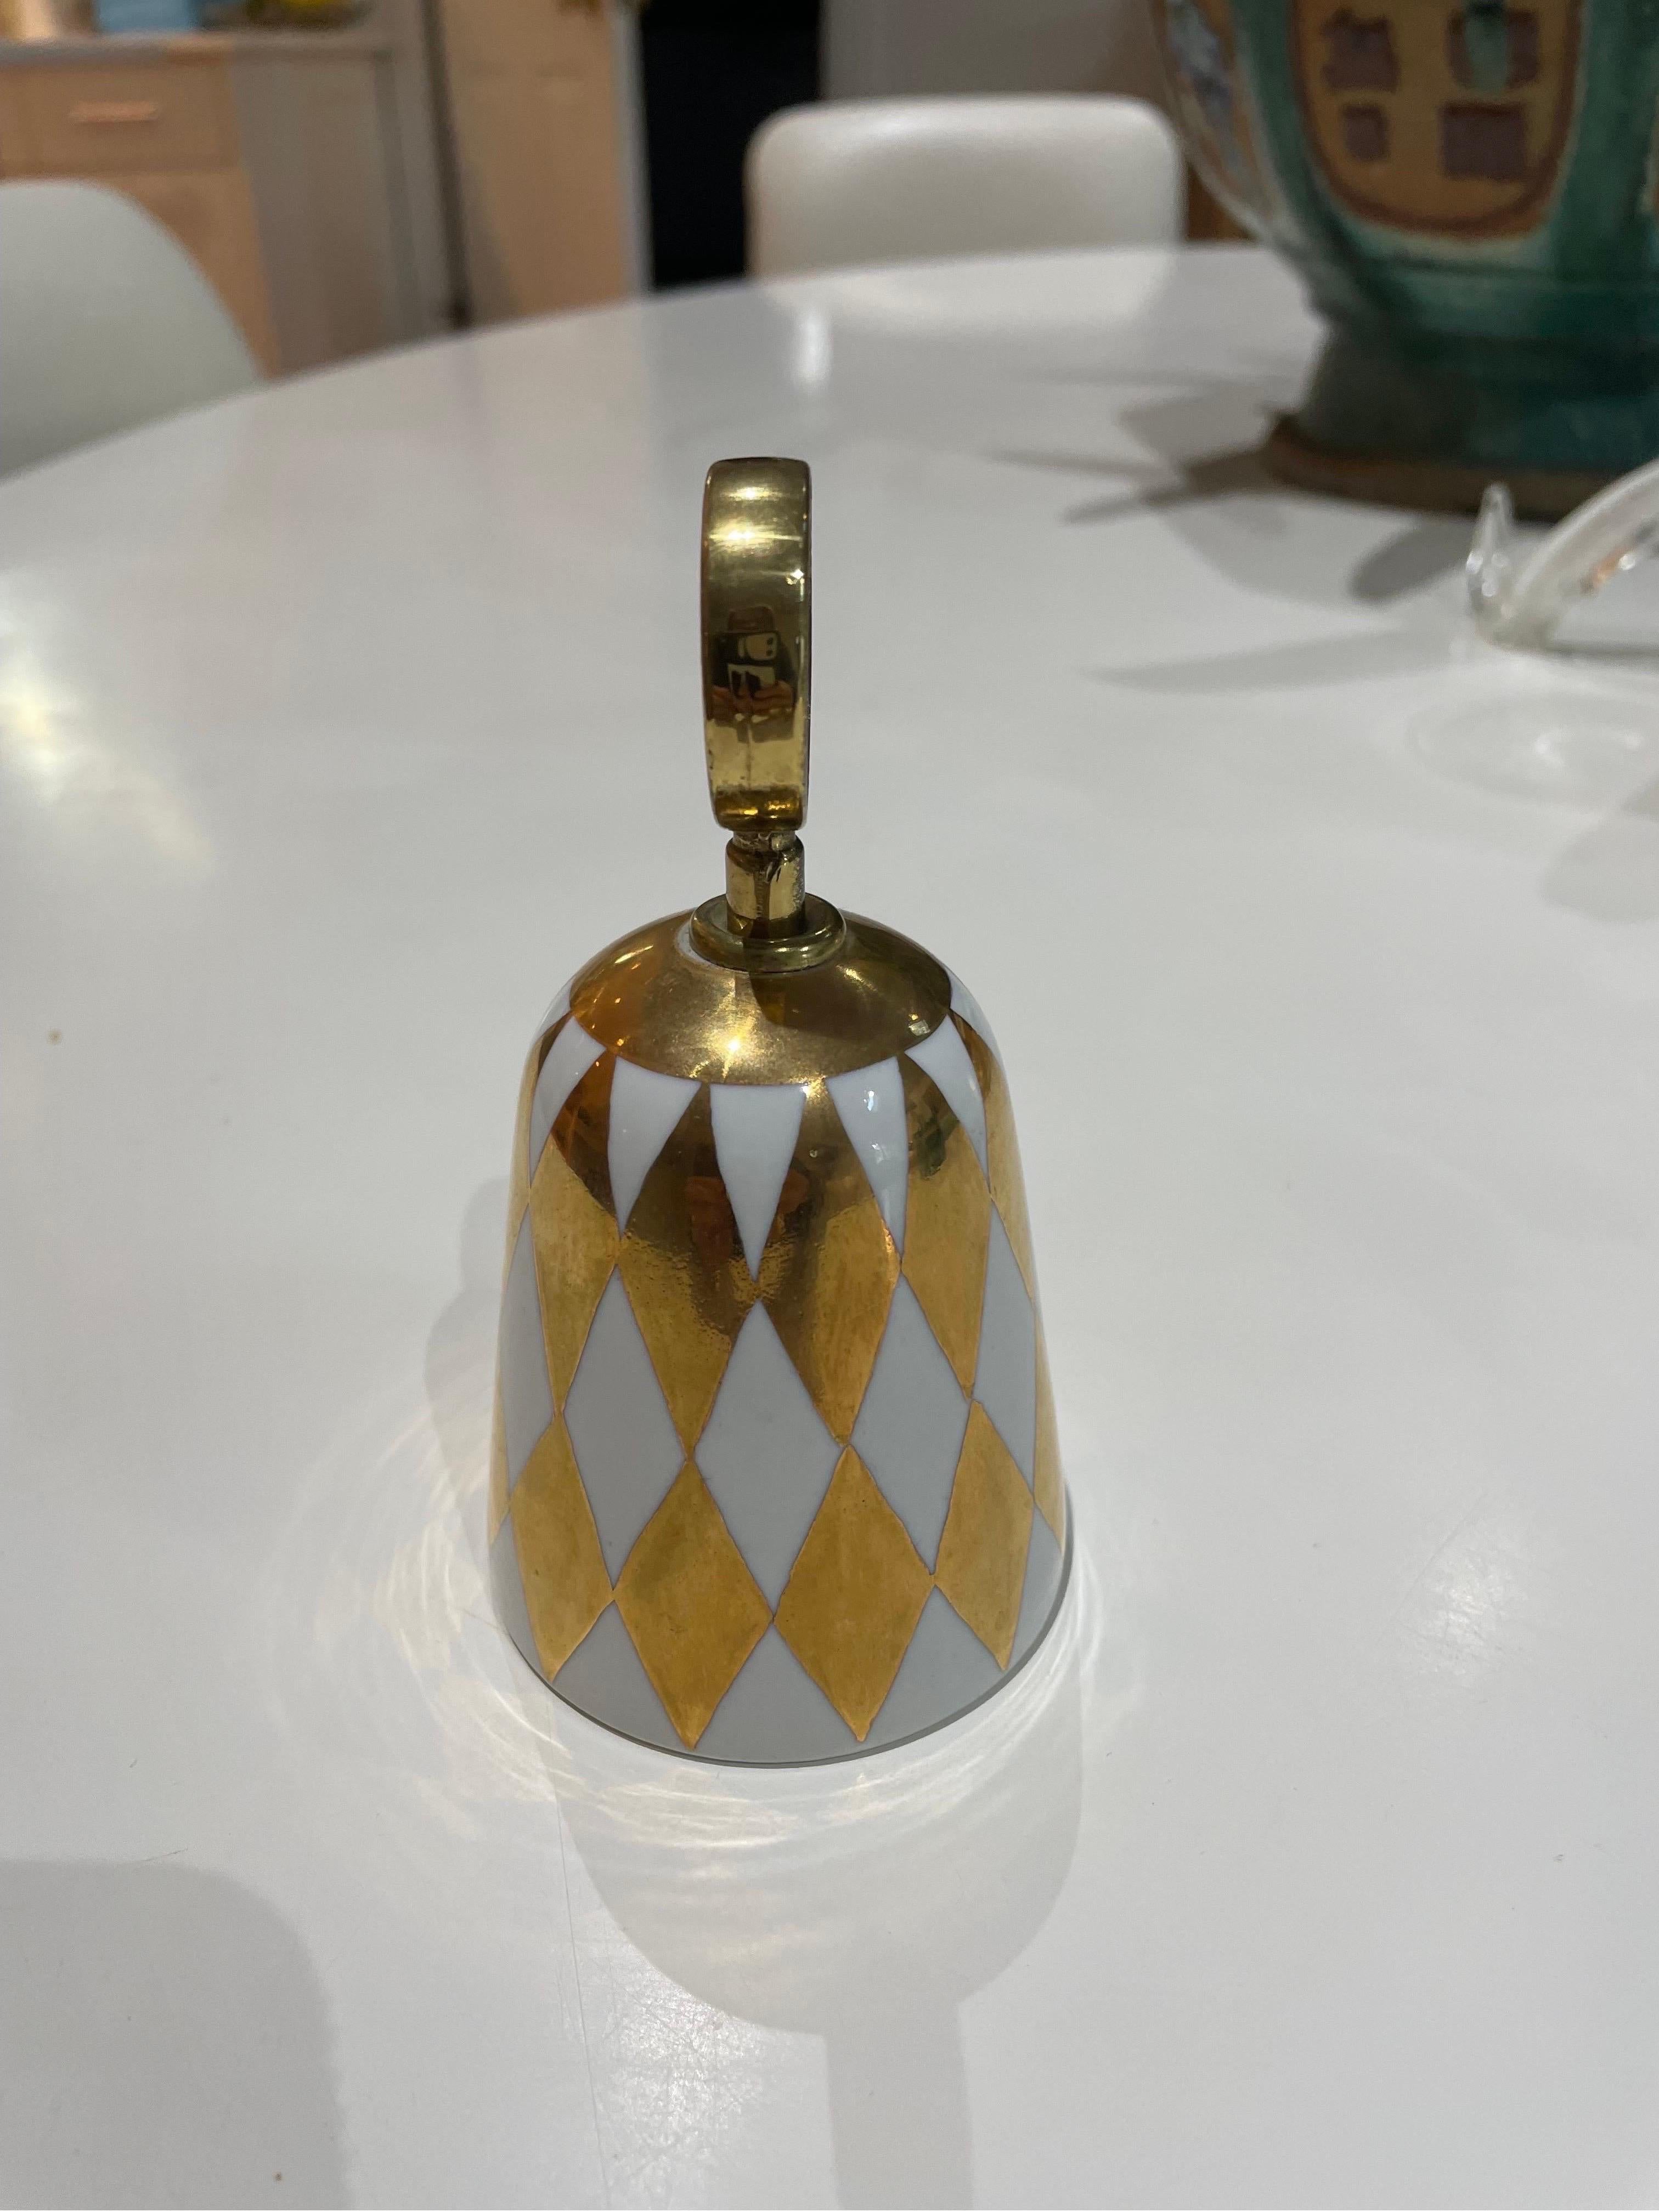 This is a unique and rare fornasetti gold and white porcelain bell from Italy.